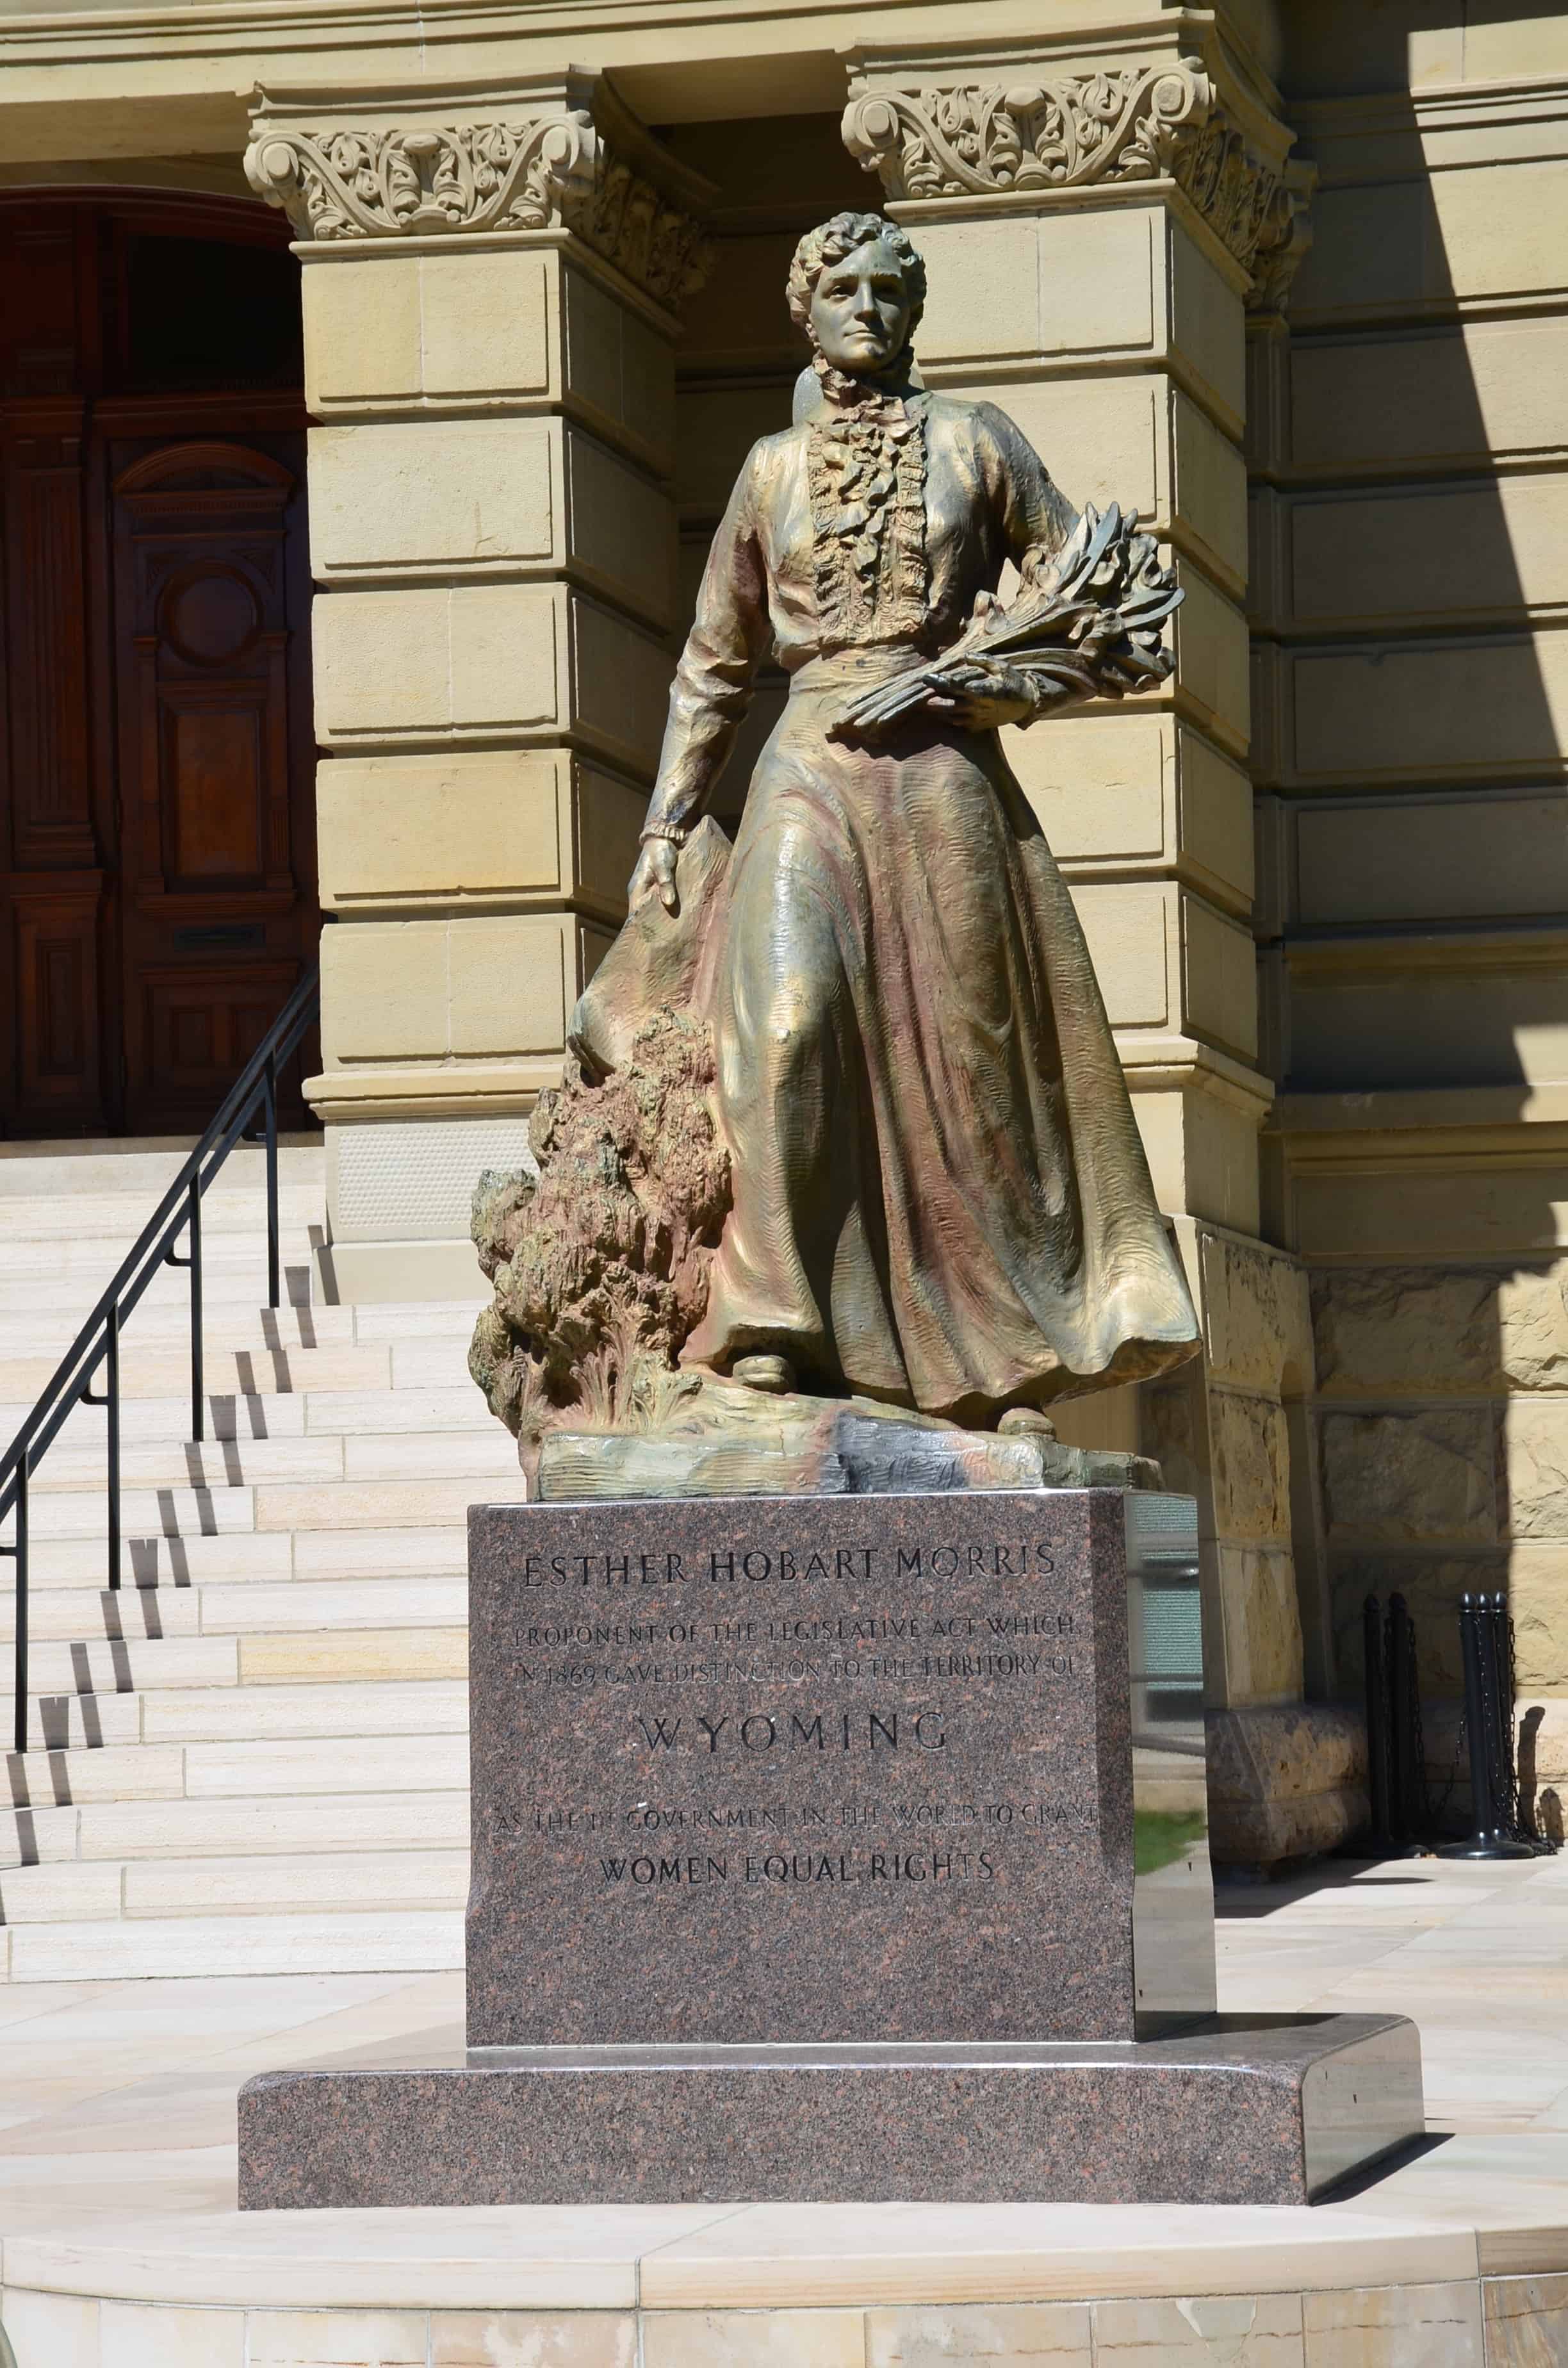 Esther Hobart Morris statue at the Wyoming State Capitol in Cheyenne